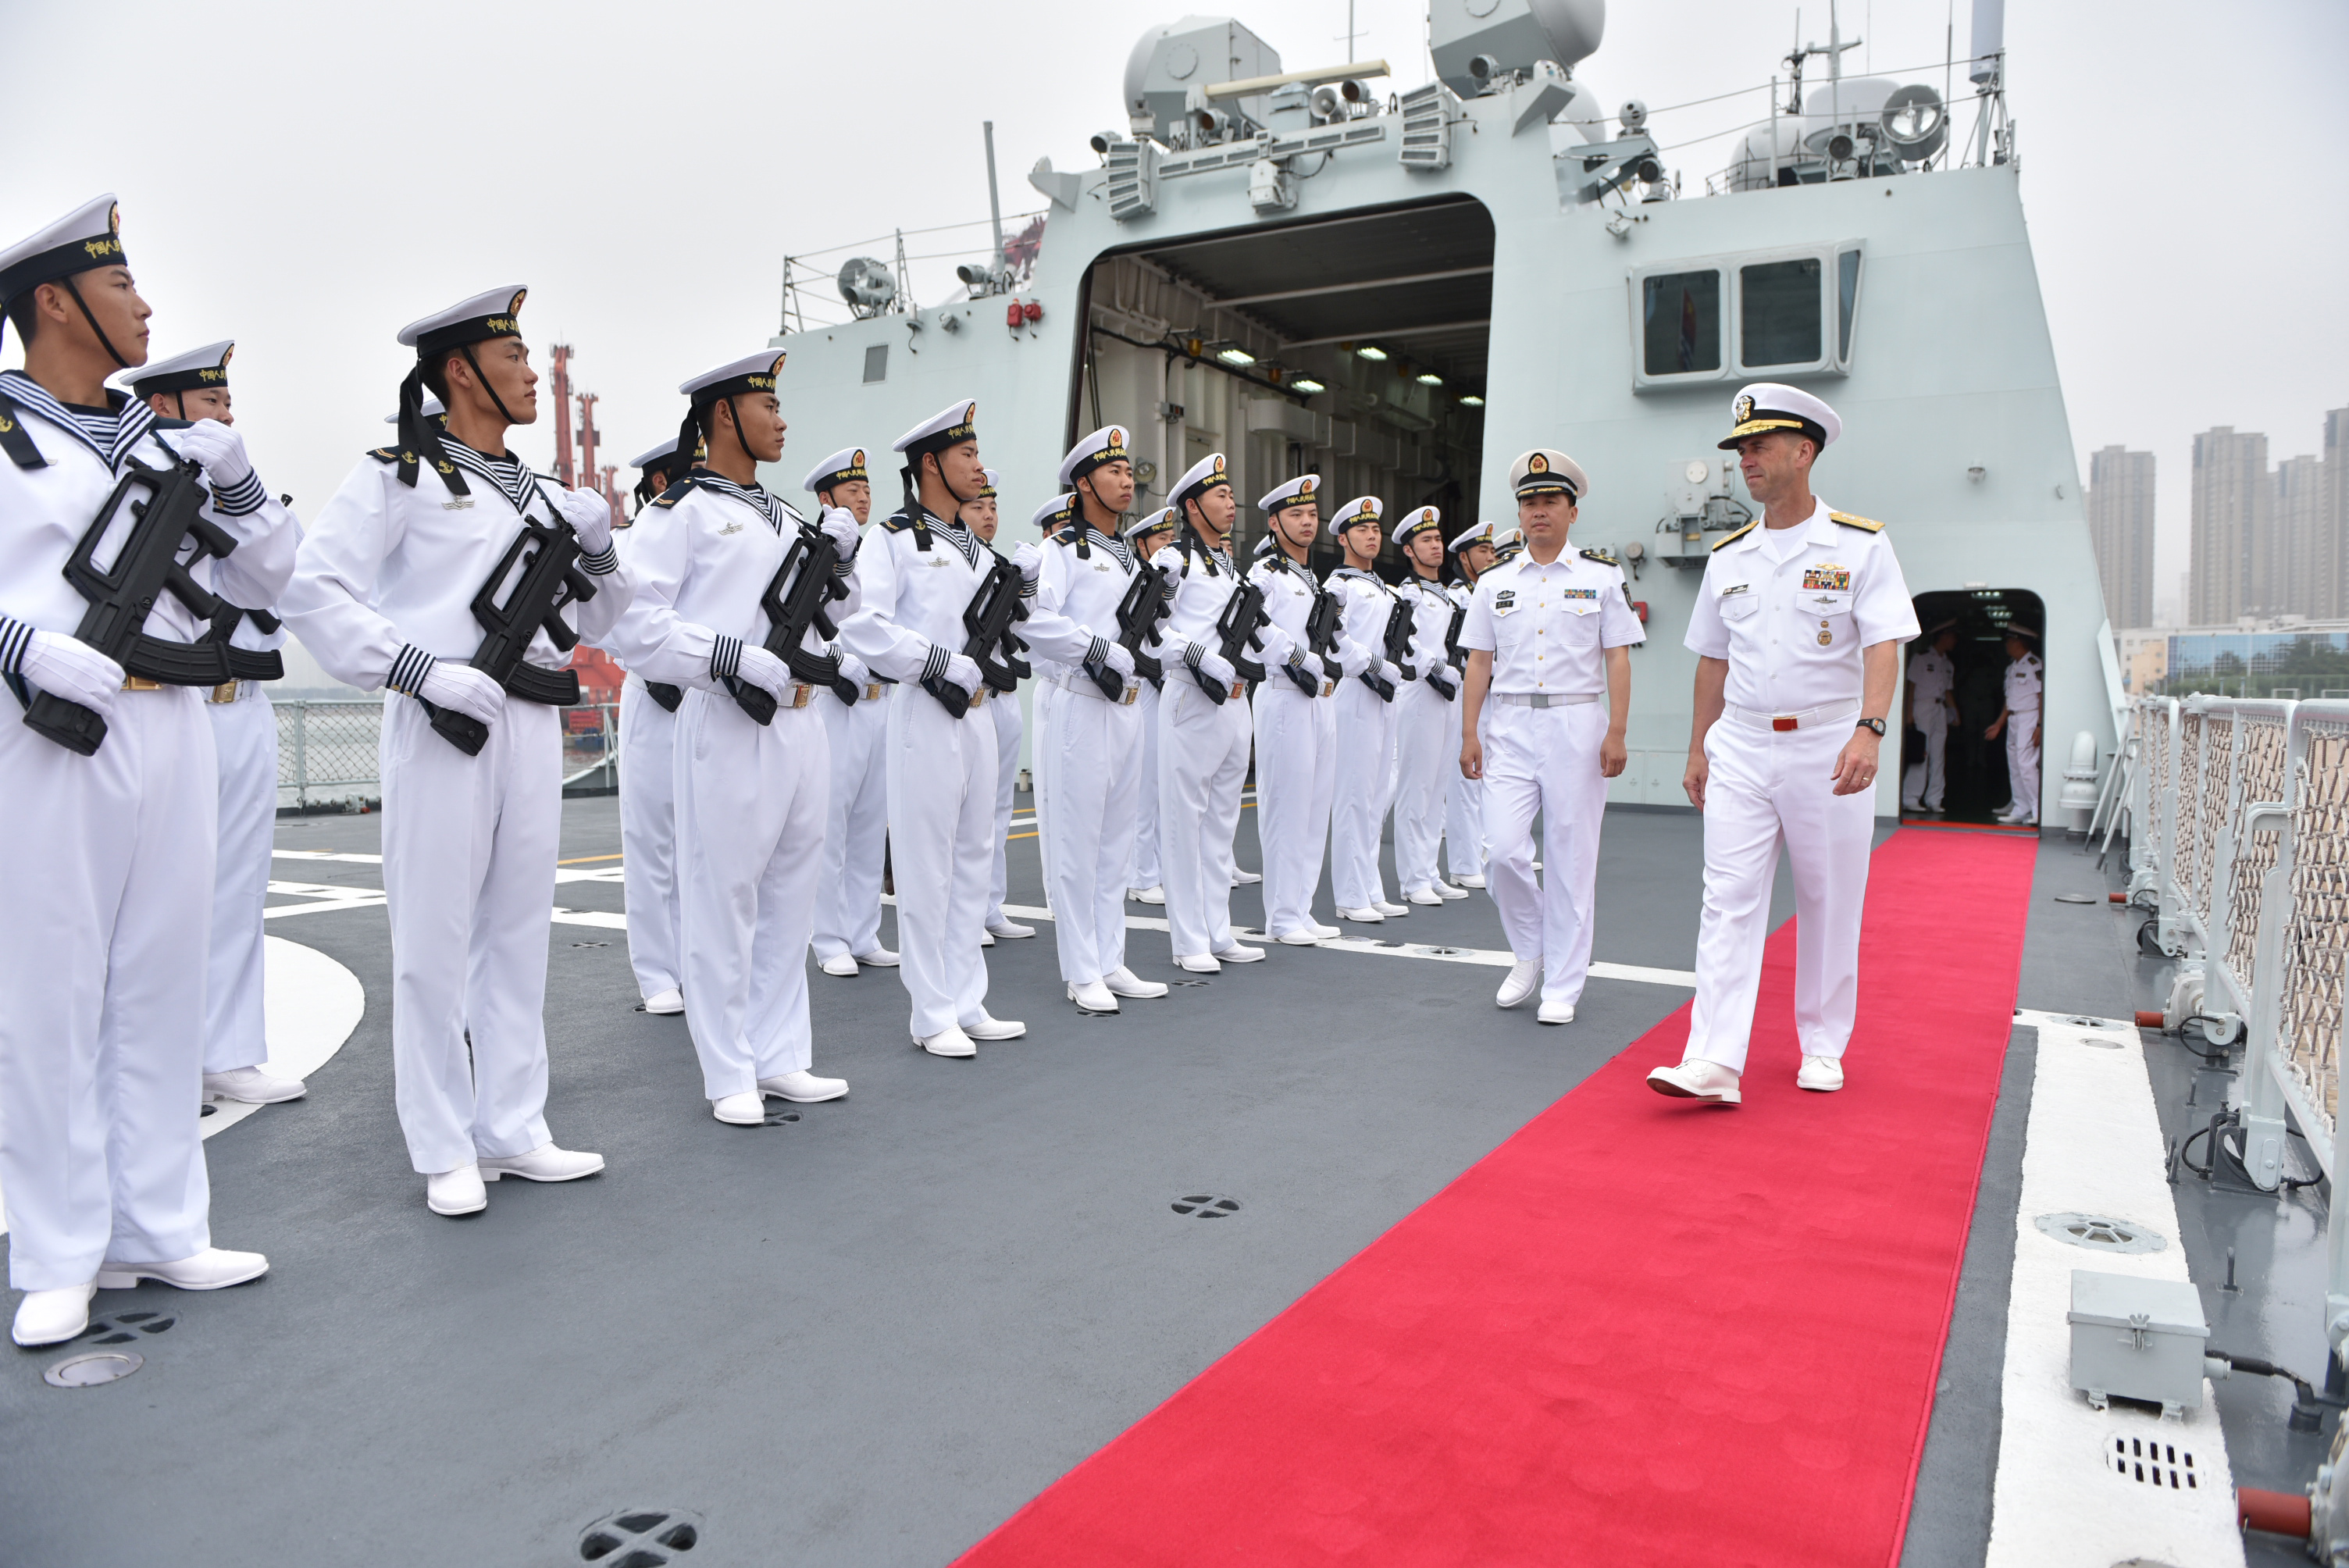 Chief of Naval Operations (CNO) Adm. John Richardson visits the Chinese People's Liberation Army (Navy) (PLA(N)) Submarine Academy, North Sea Fleet Headquarters and a PLAN frigate and submarine in Qingdao, China on July 20, 2016. US Navy photo.